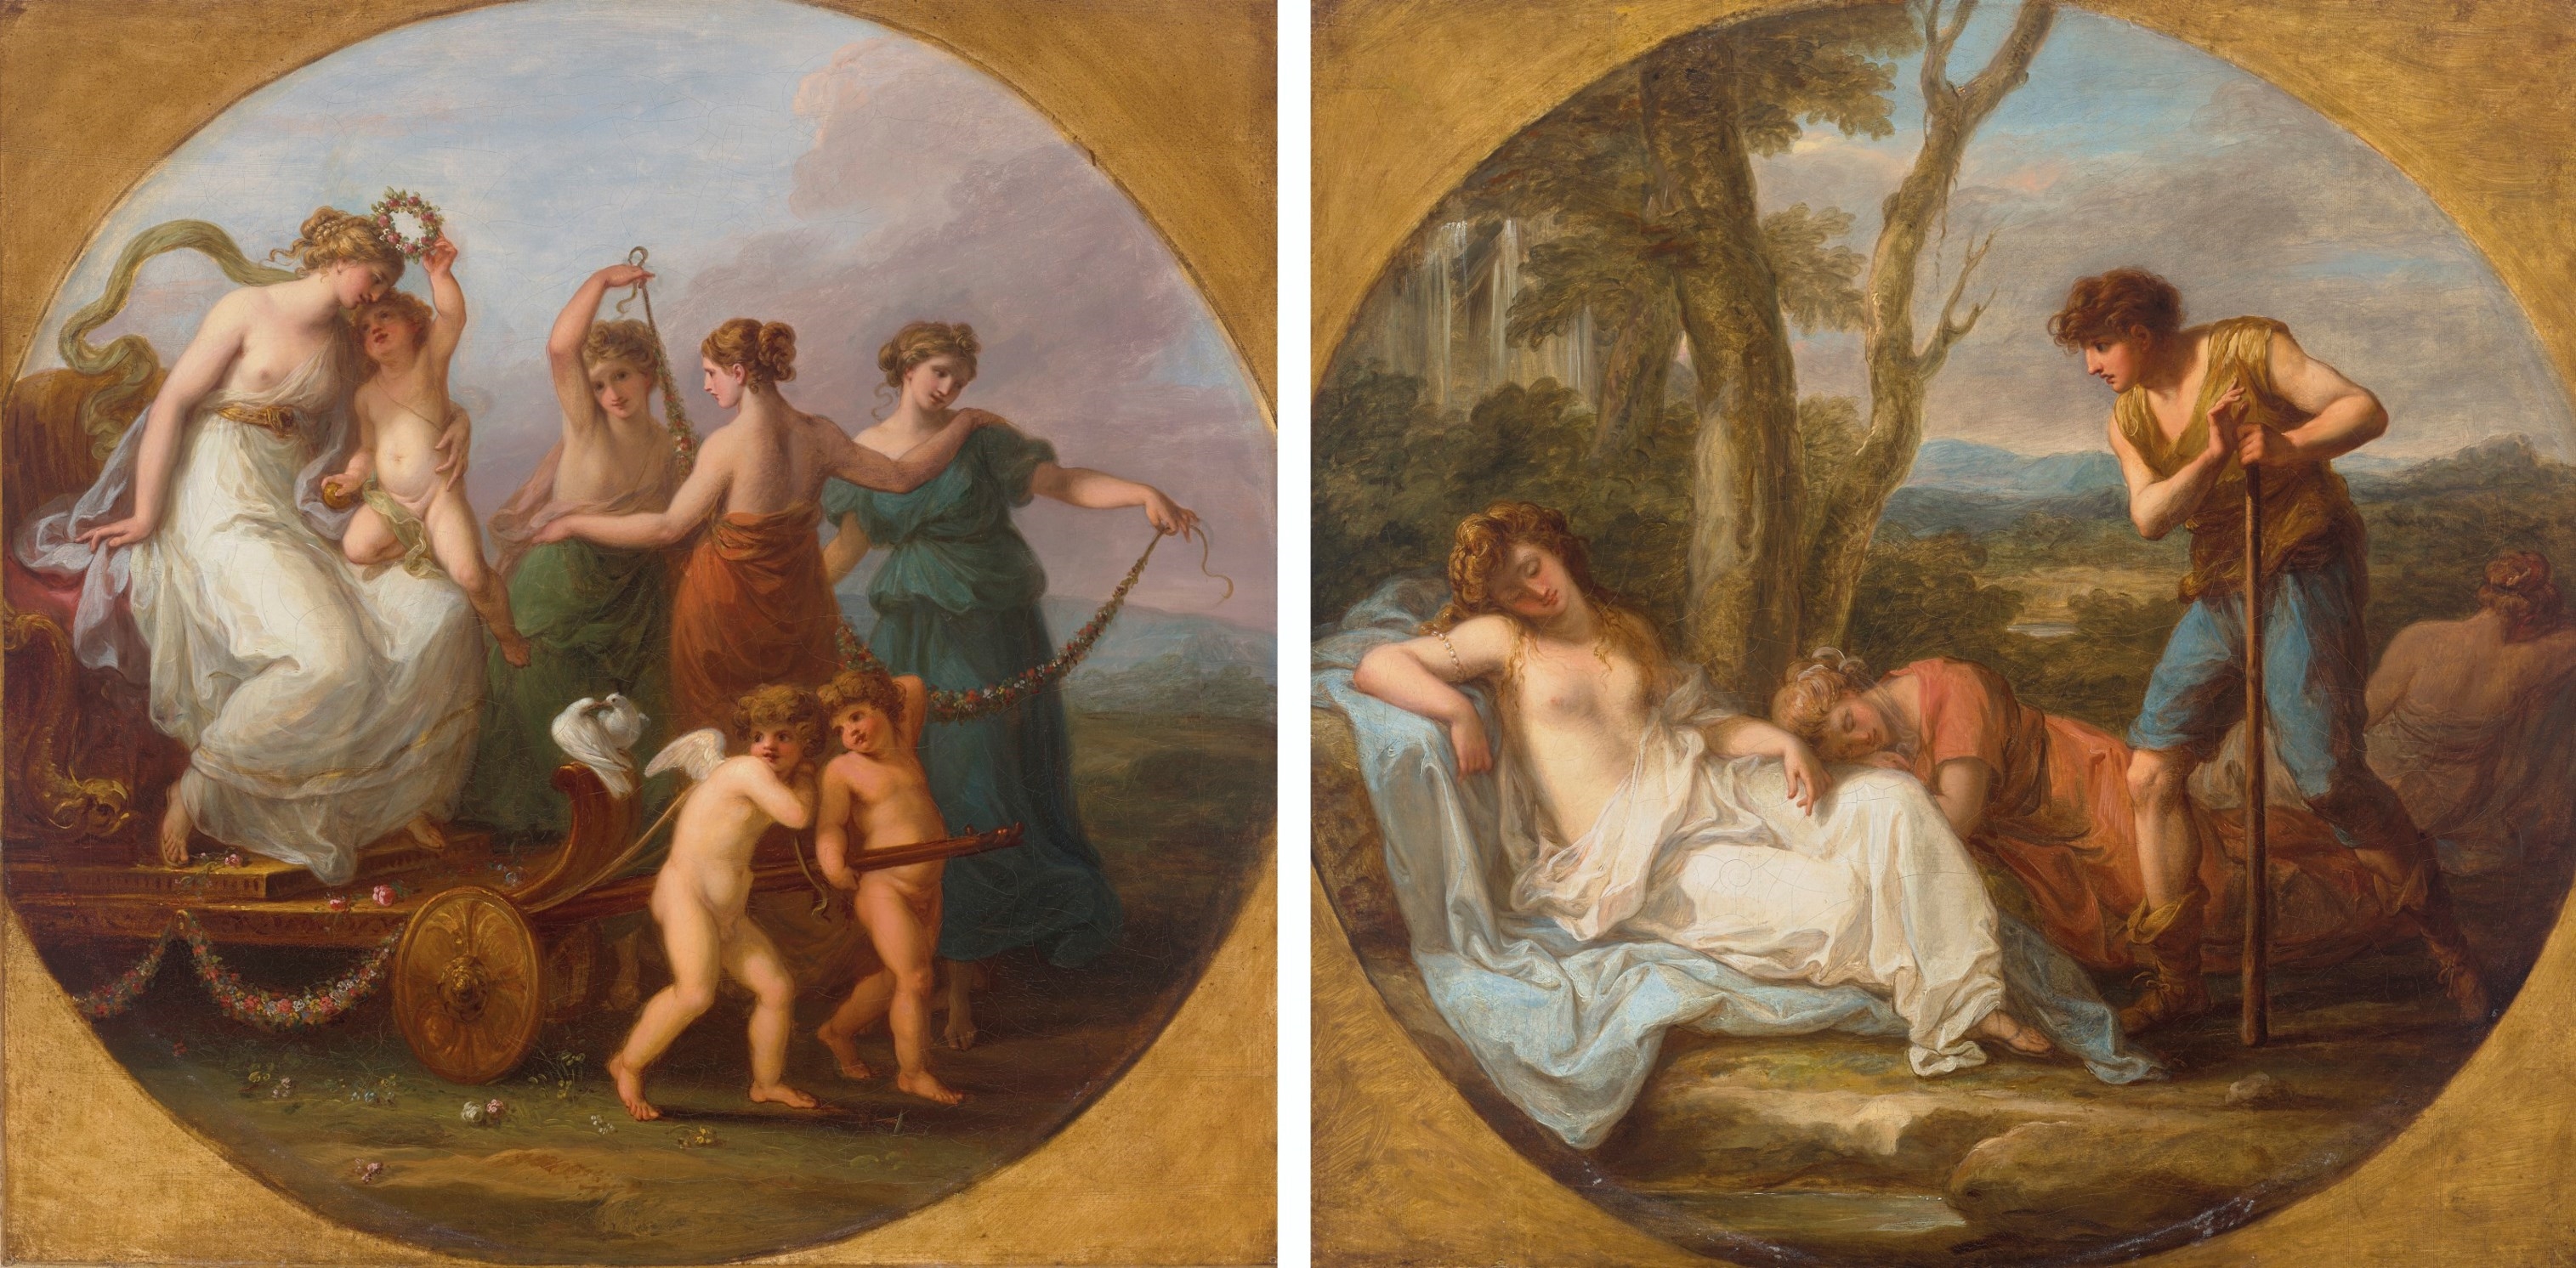 The Triumph of Venus with the Three Graces; and Cimon and Iphigenia by Angelica Kauffmann